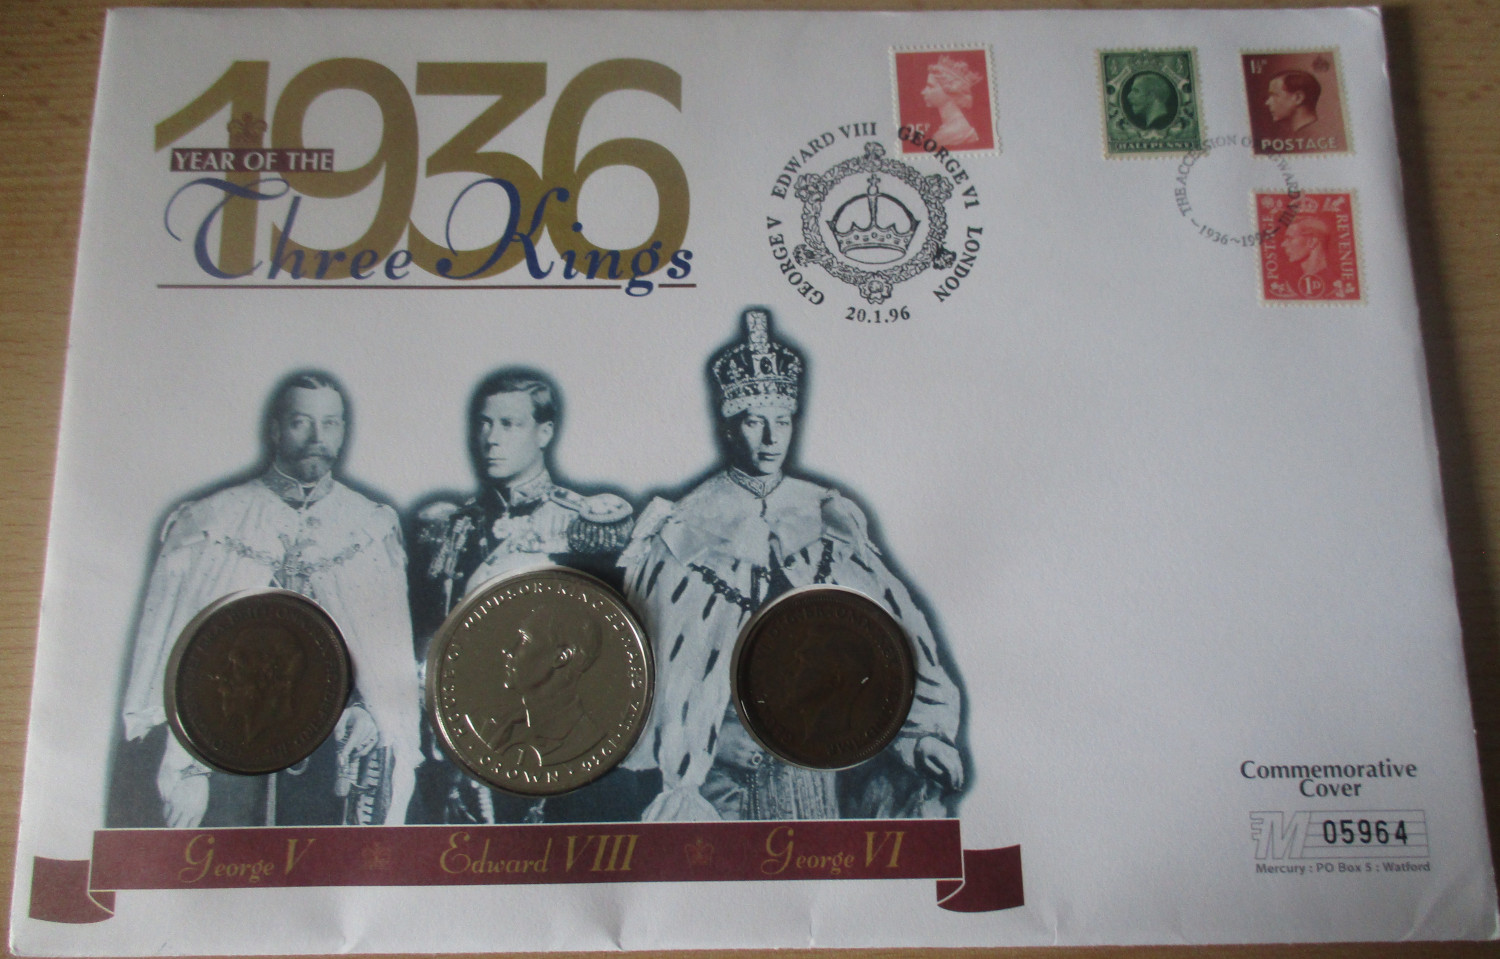 GIBRALTAR 1993 year of the three kings 1936 1 crown UNC